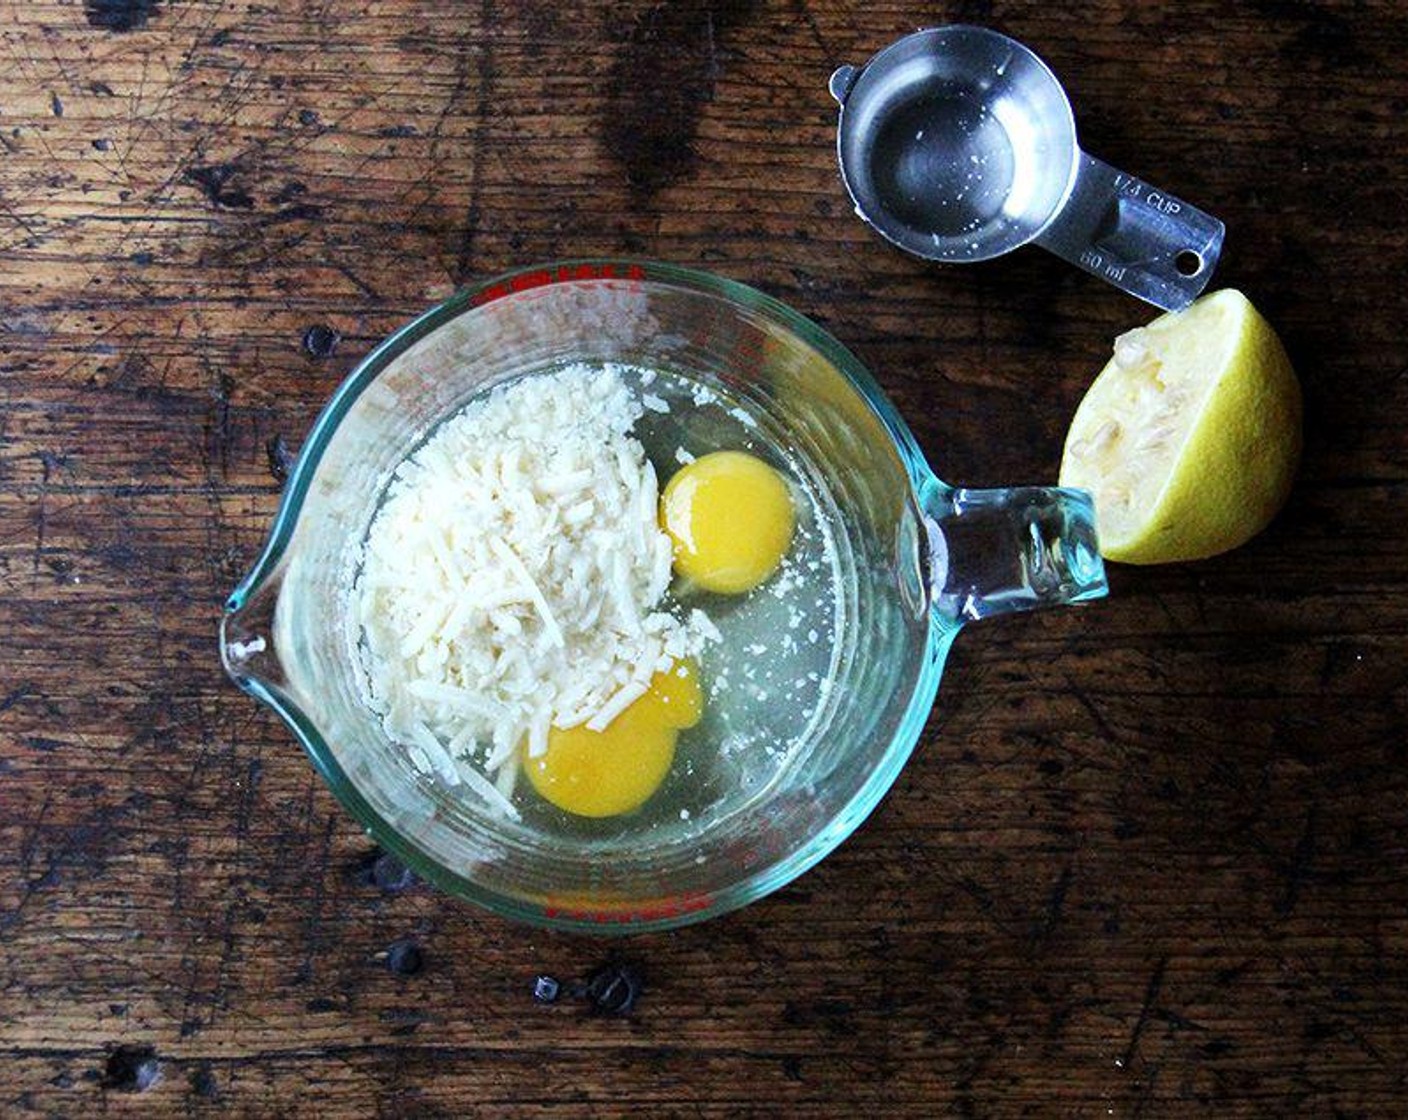 step 6 In a medium bowl or liquid measure, whisk together Farmhouse Eggs® Large Brown Eggs (2), Parmigiano-Reggiano (1/4 cup), and juice from Lemon (1). Whisk ¼ cup pasta water into the egg mixture.